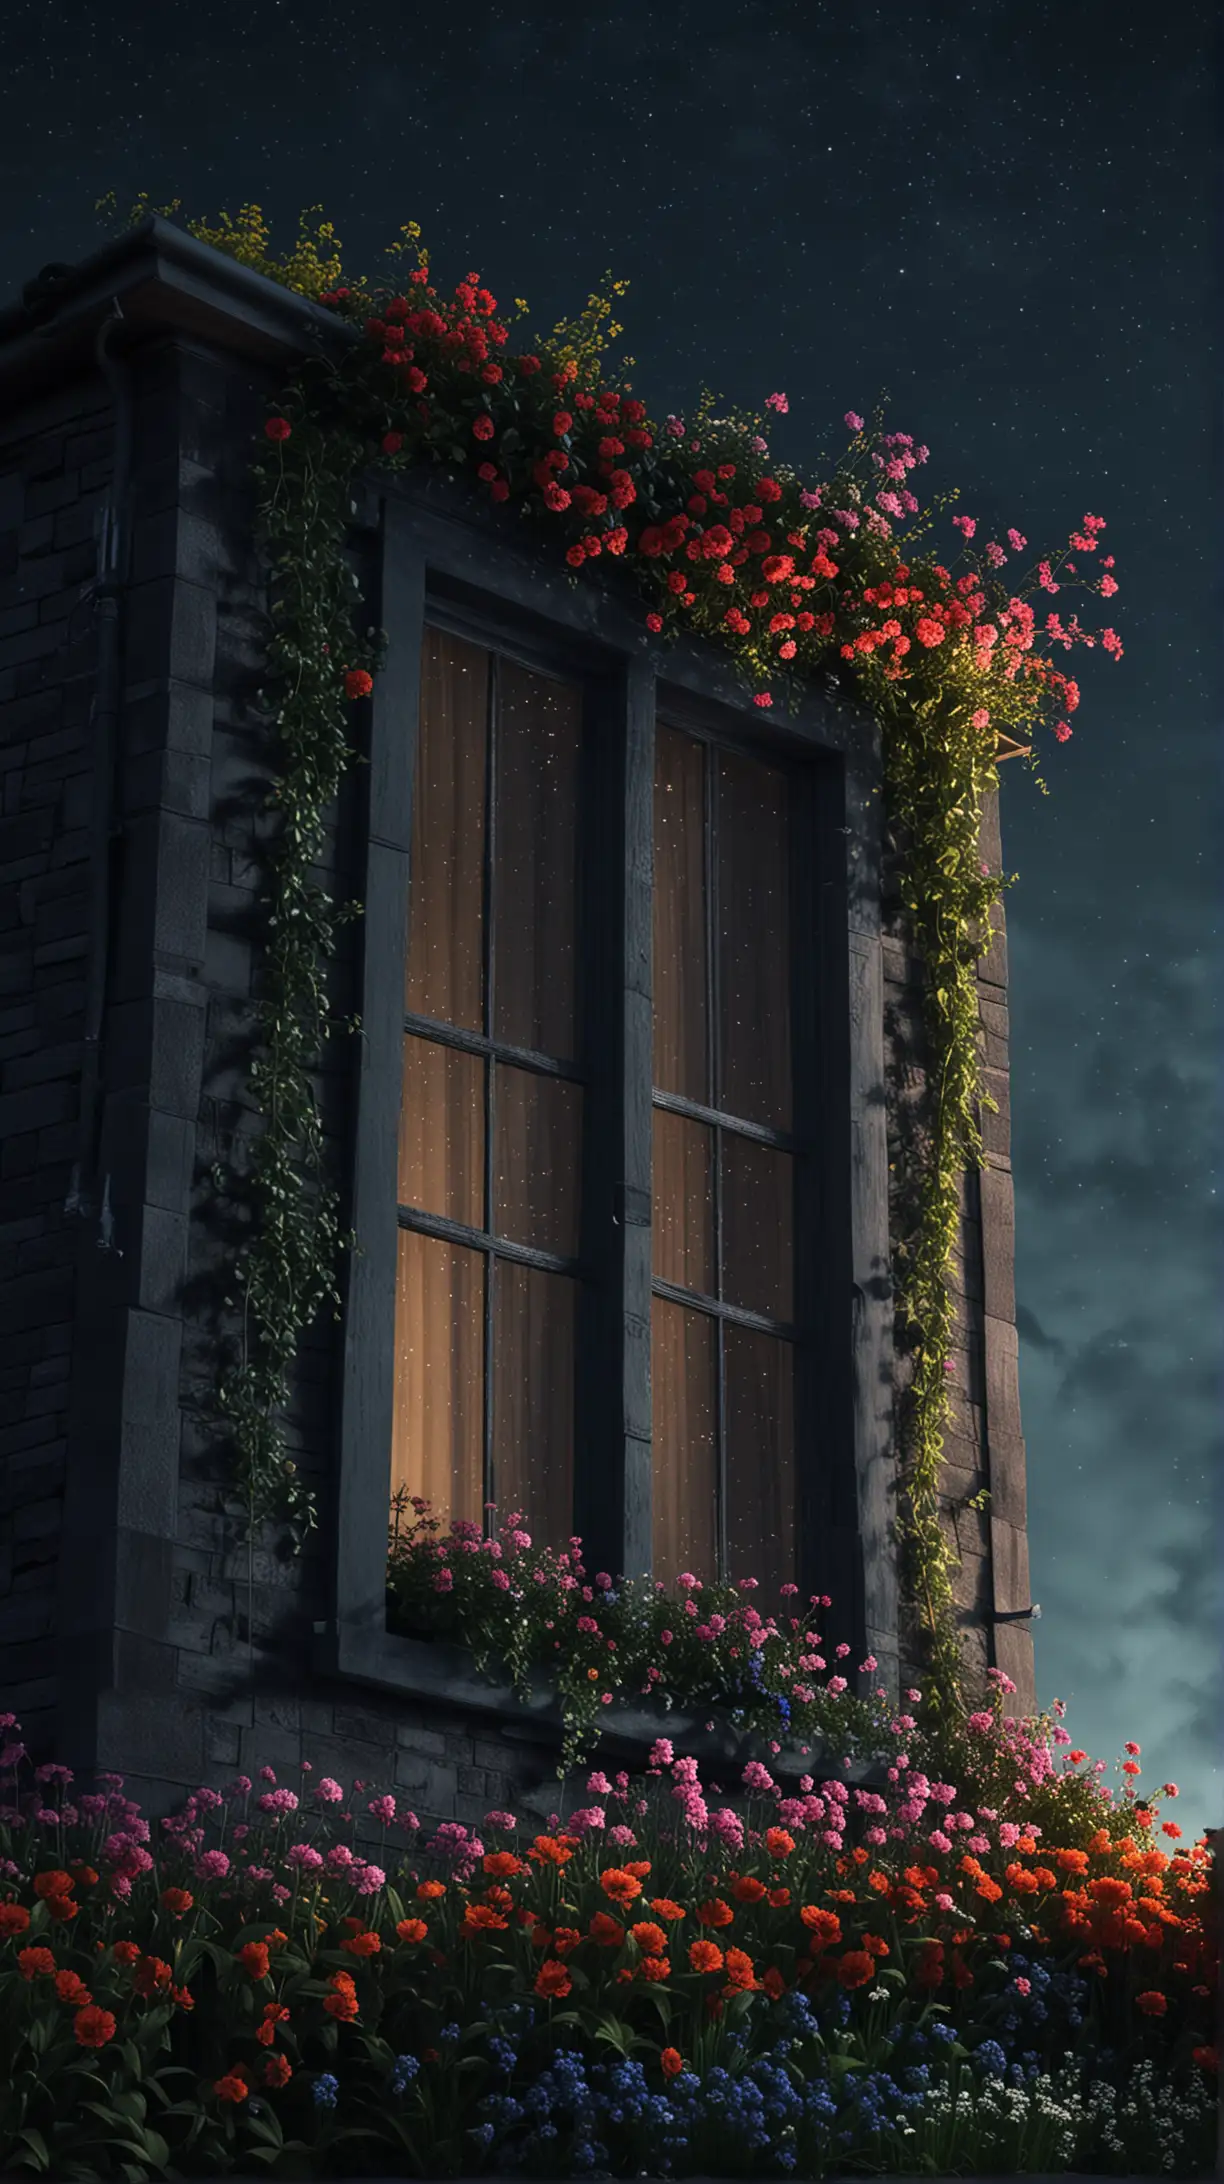 Eerie Night Dark Countryside House with Vibrant Flower Garden View